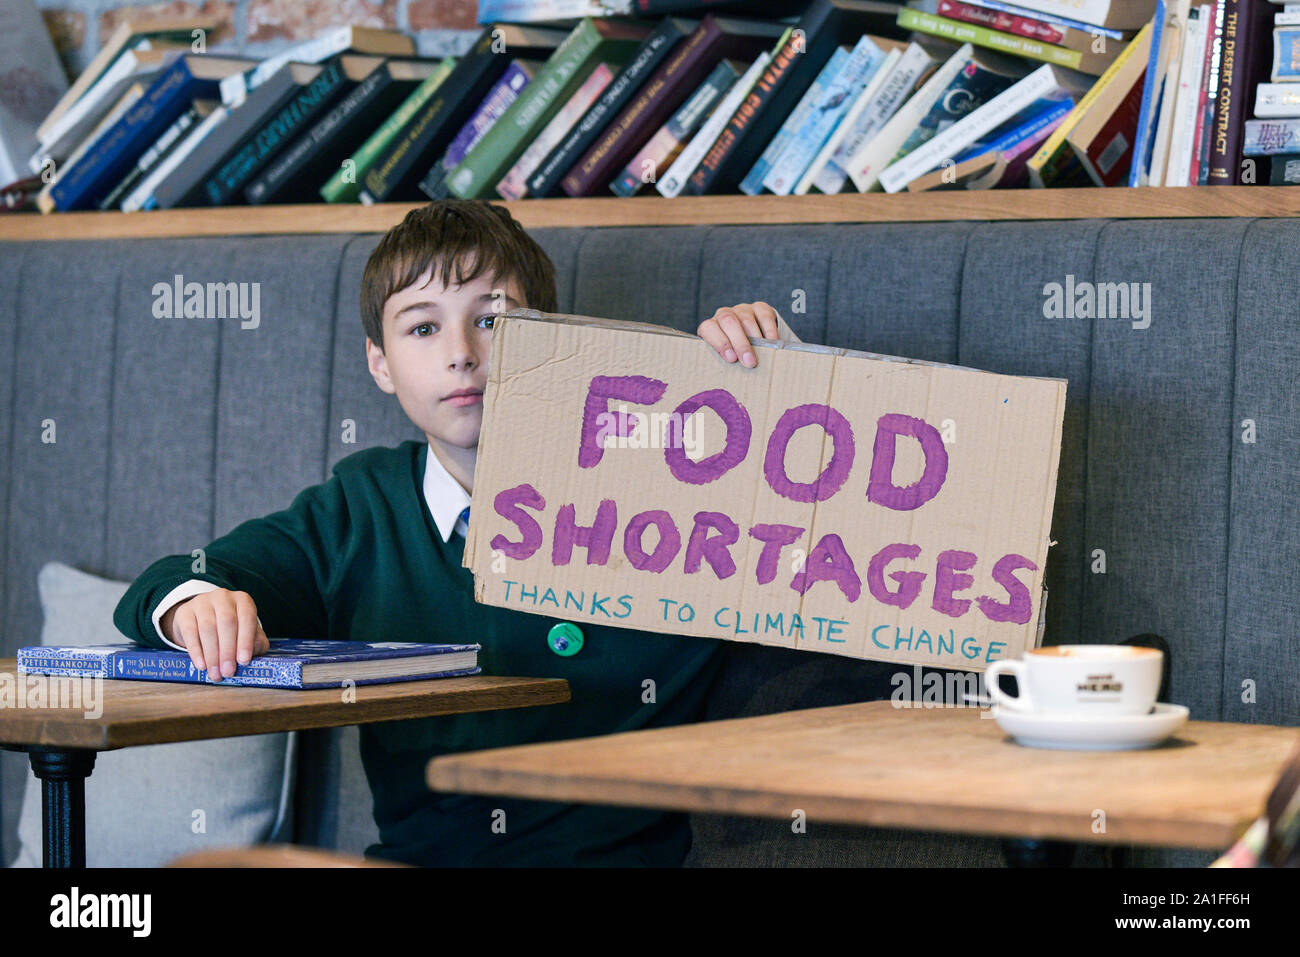 A young school boy sitting in a coffee bar holding a hand written sign about food shortages. Stock Photo